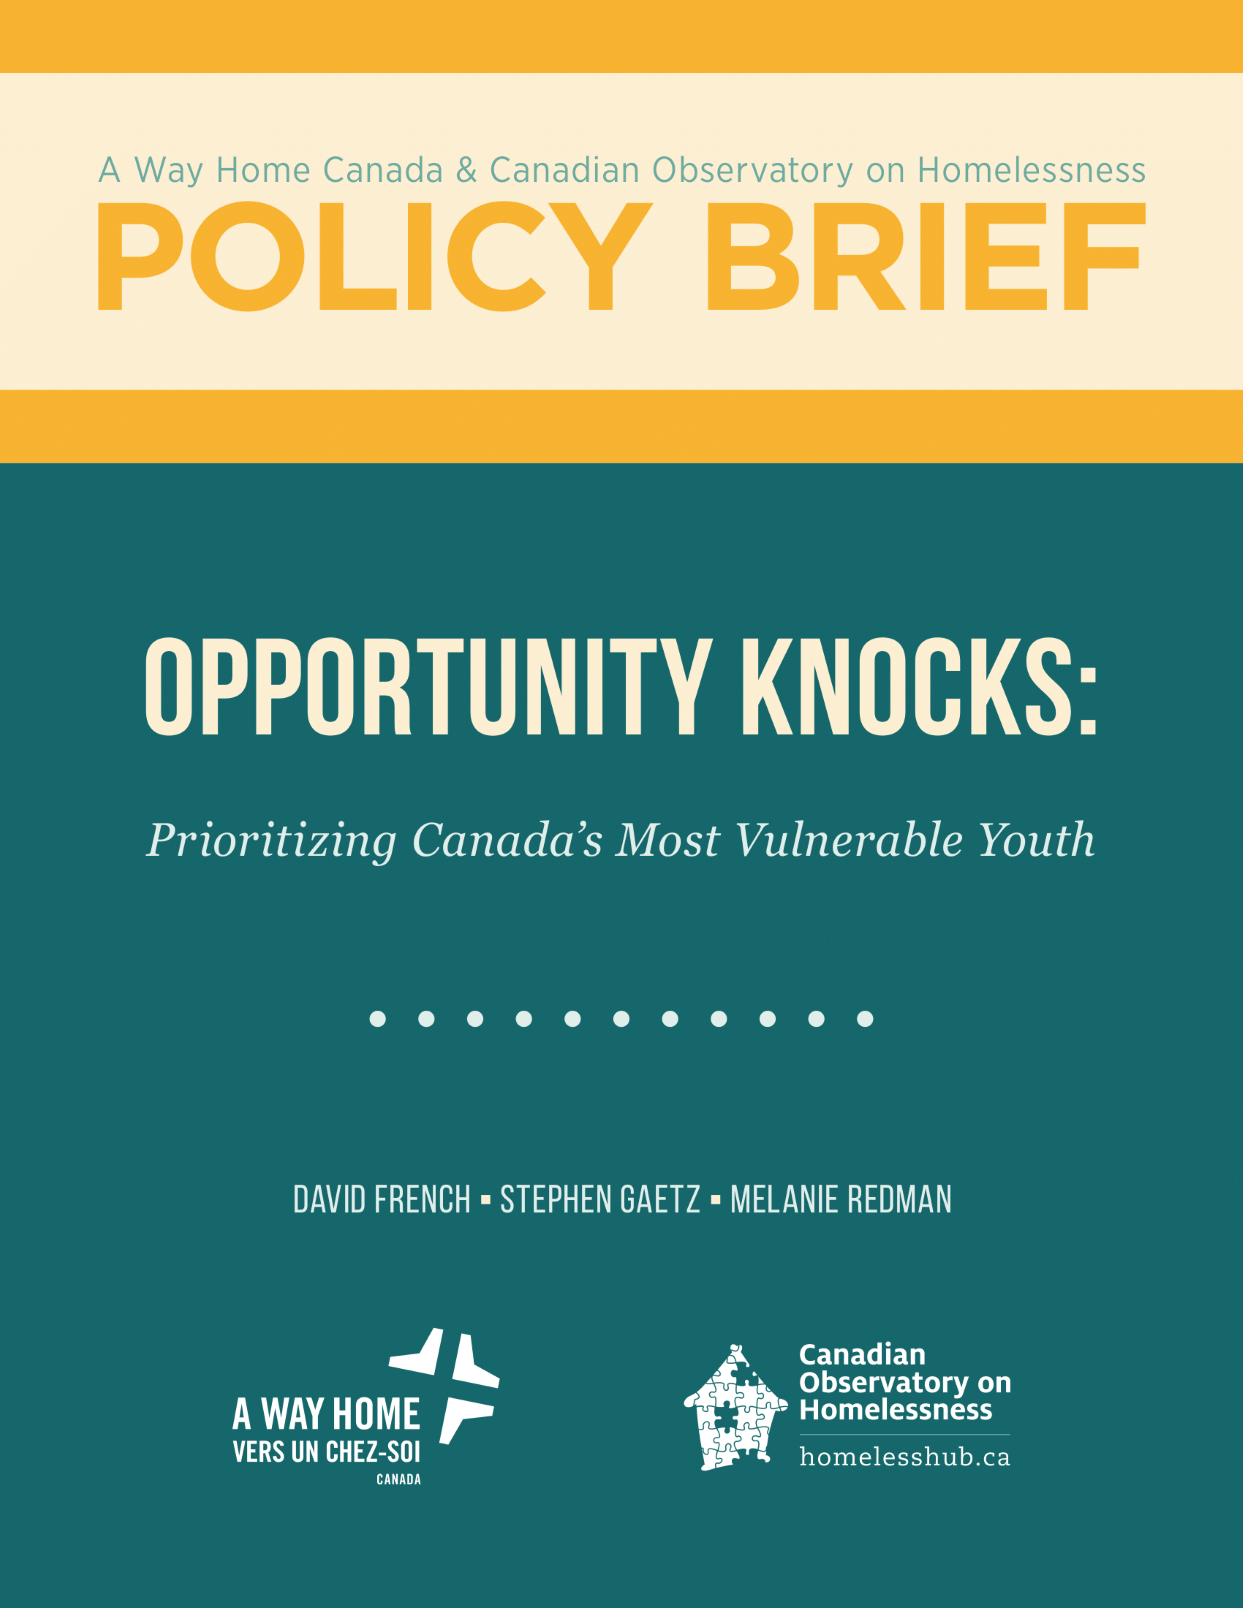 The front cover of the policy brief "Opportunity Knocks"